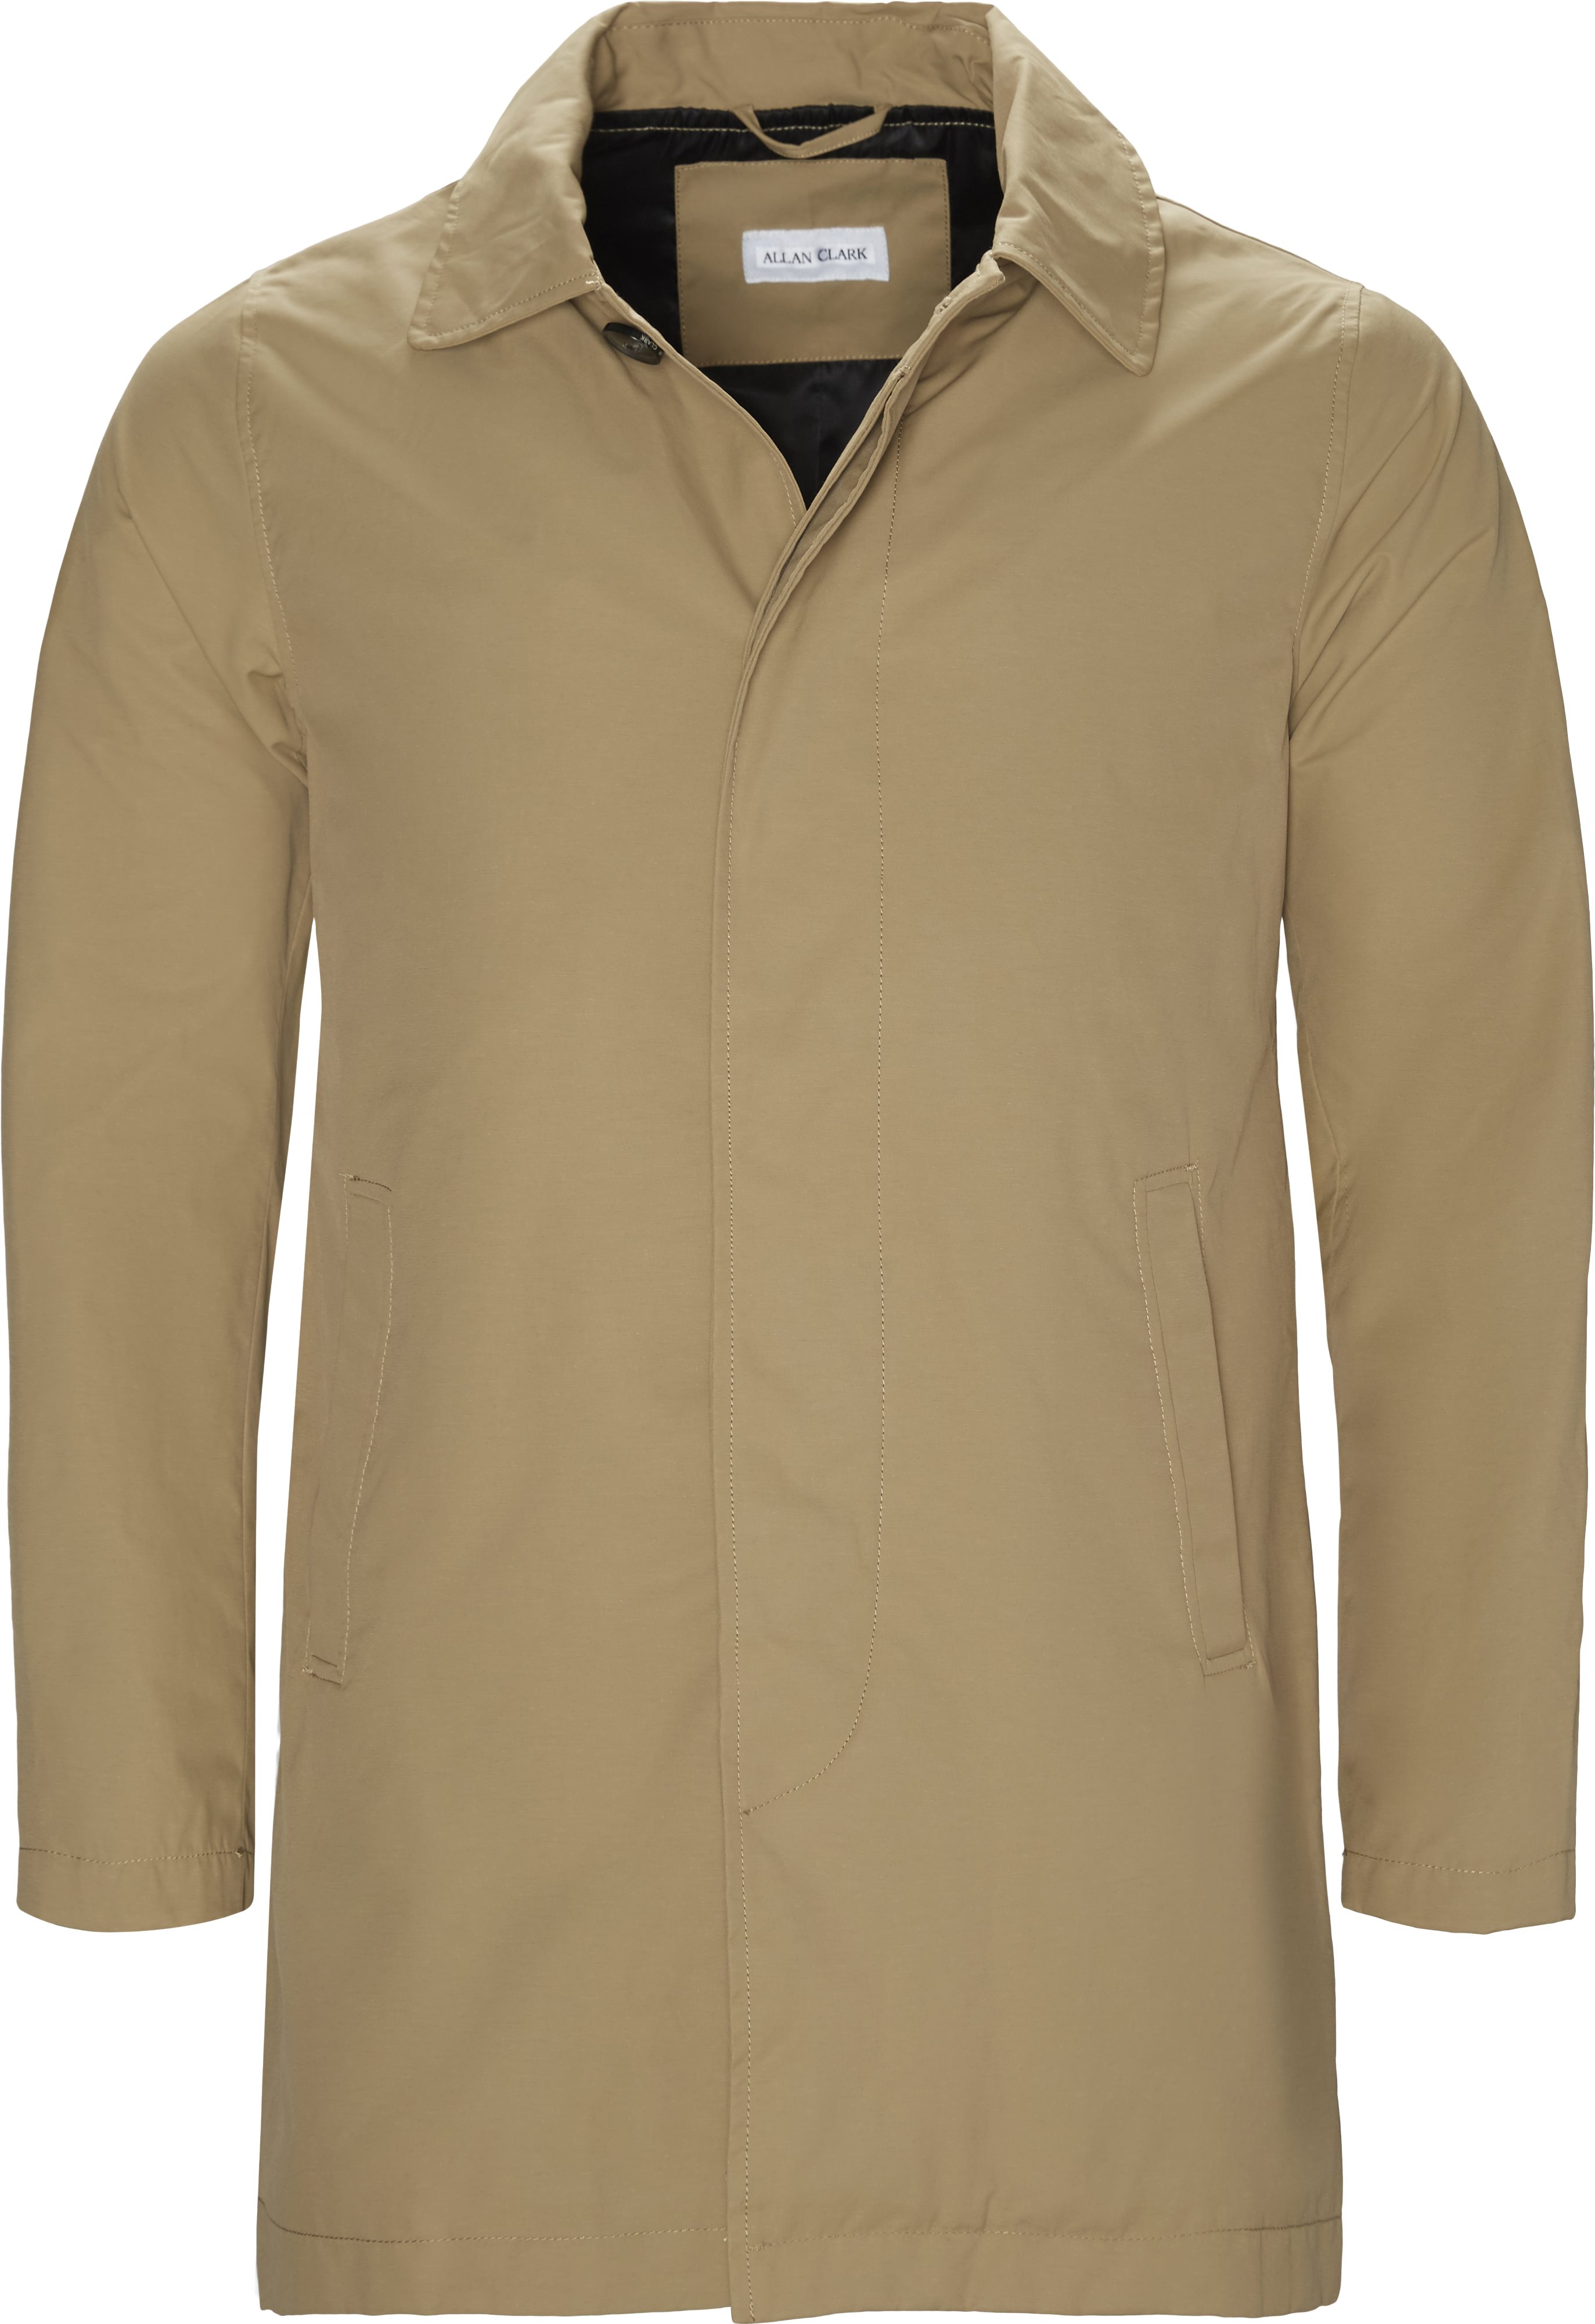 Zoom ind Antipoison ulovlig ROBINSON Jackets SAND from Allan Clark 67 EUR